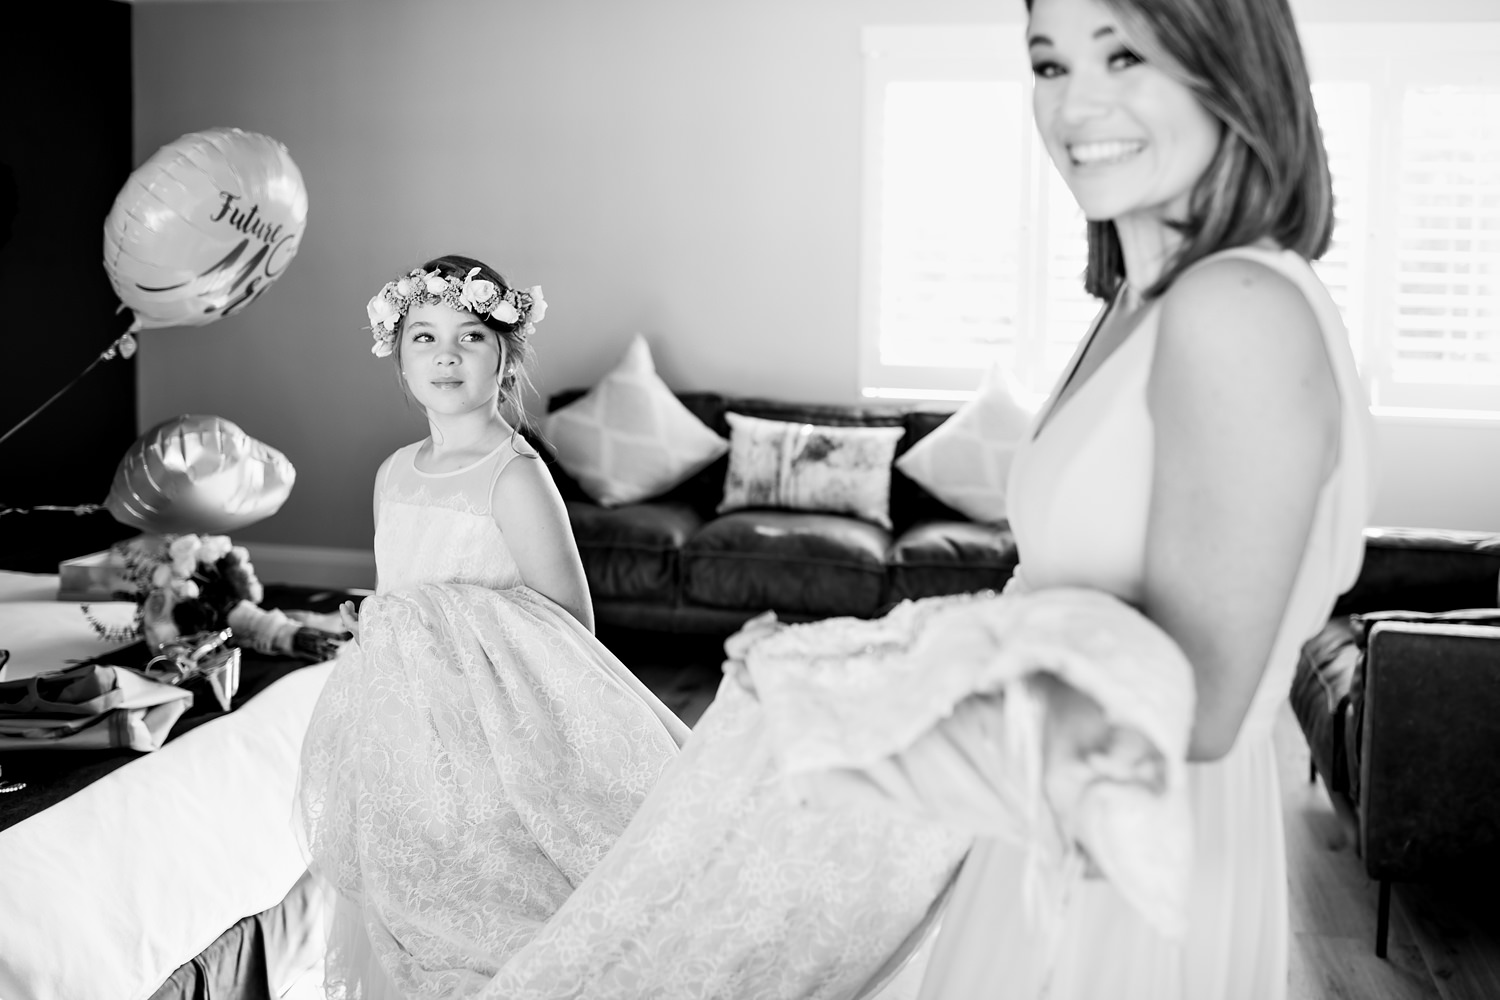 The flower girl looks at a smiling bridesmaid as they hold the wedding dress in preparation